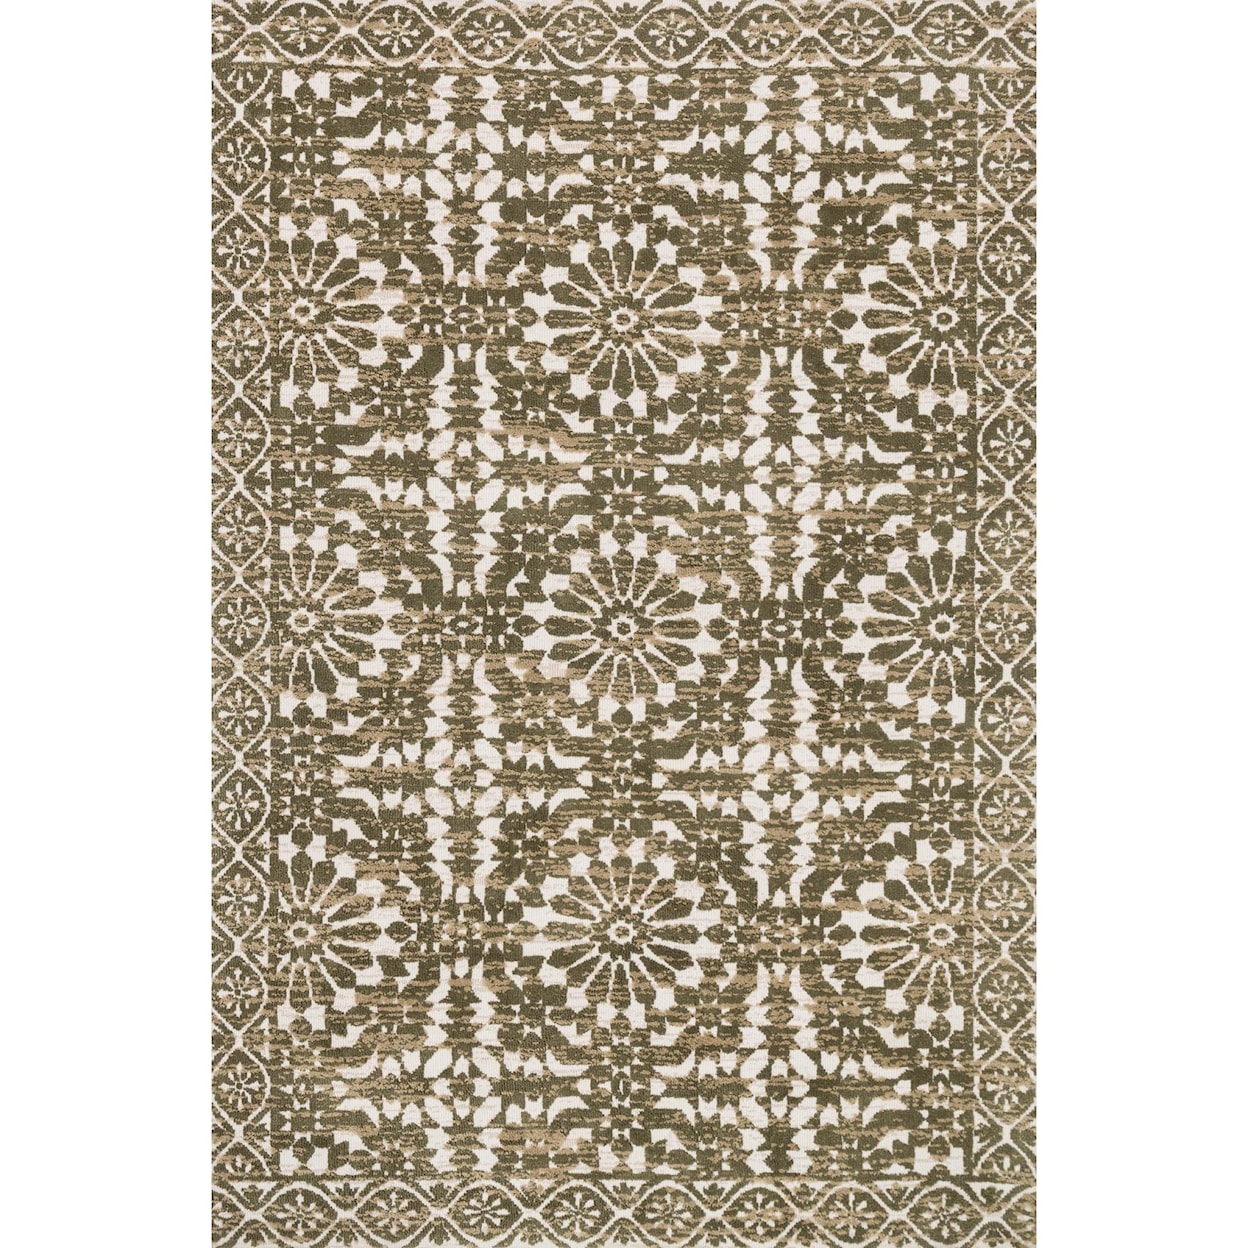 Magnolia Home by Joanna Gaines for Loloi Lotus 5' 0" x 7' 6" Rectangle Rug